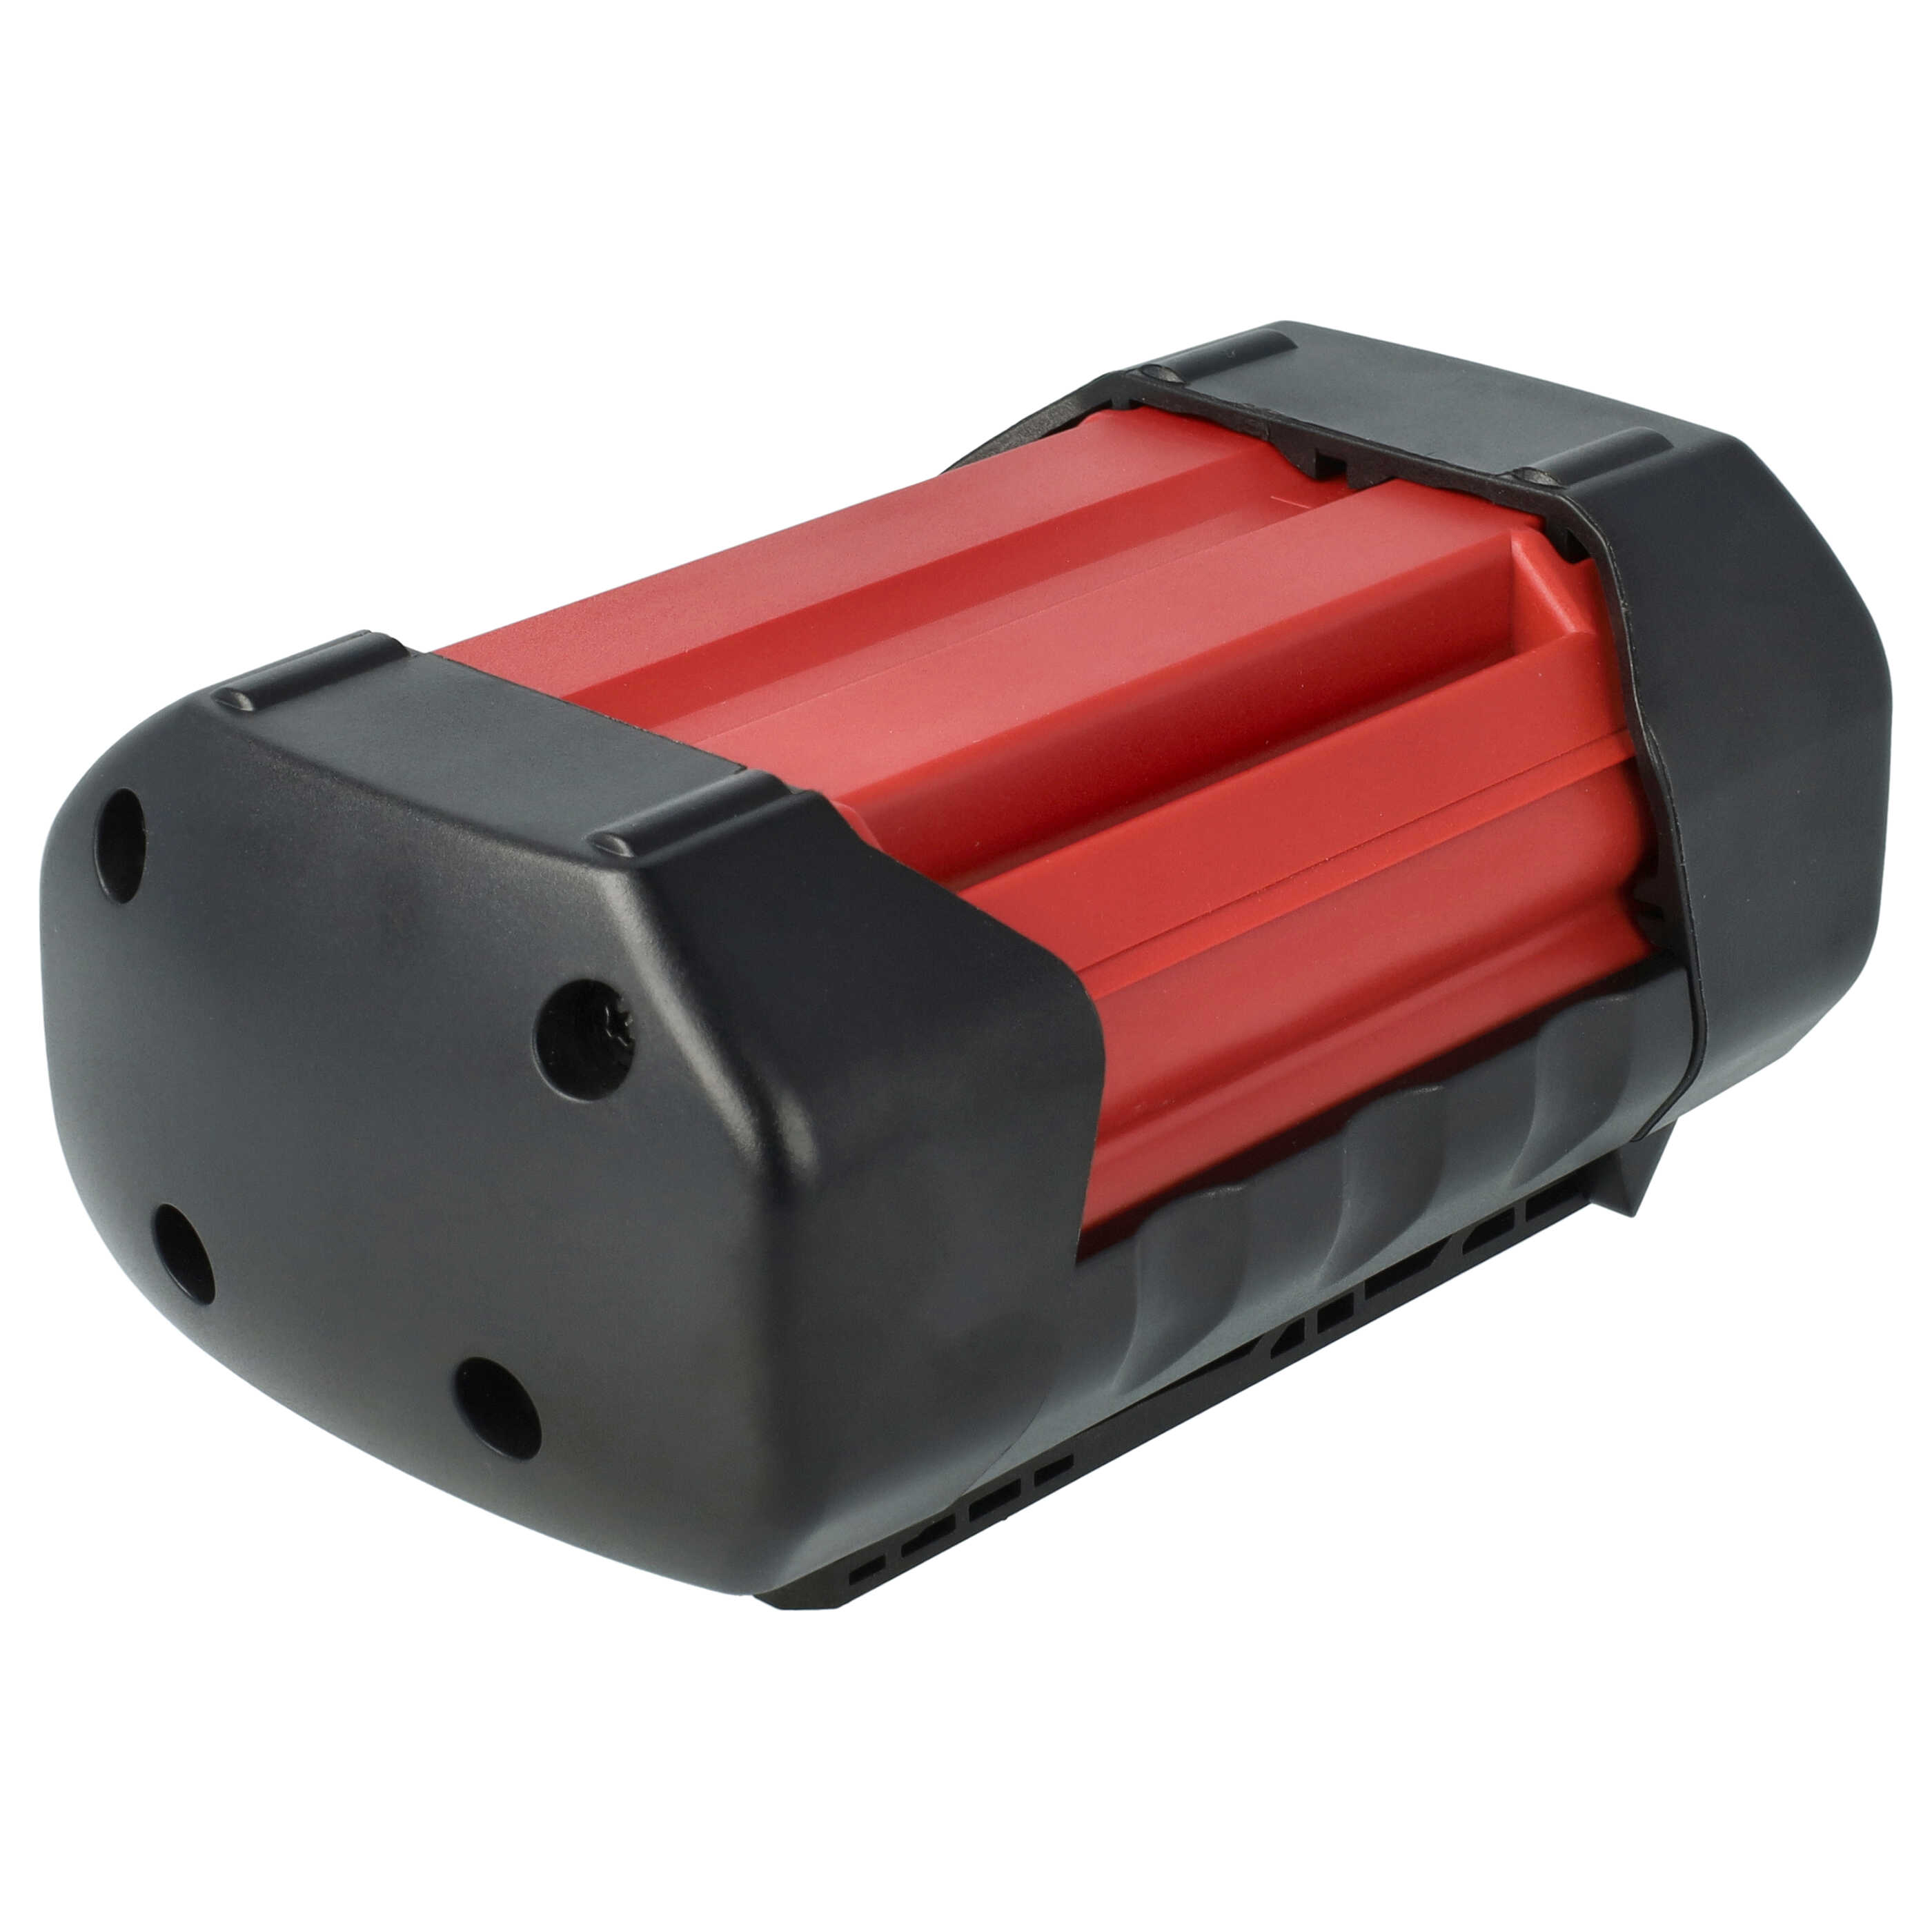 Lawnmower Battery Replacement for Bosch 2 607 336 173, 1600A0022N - 3000mAh 36V Li-Ion, black / red